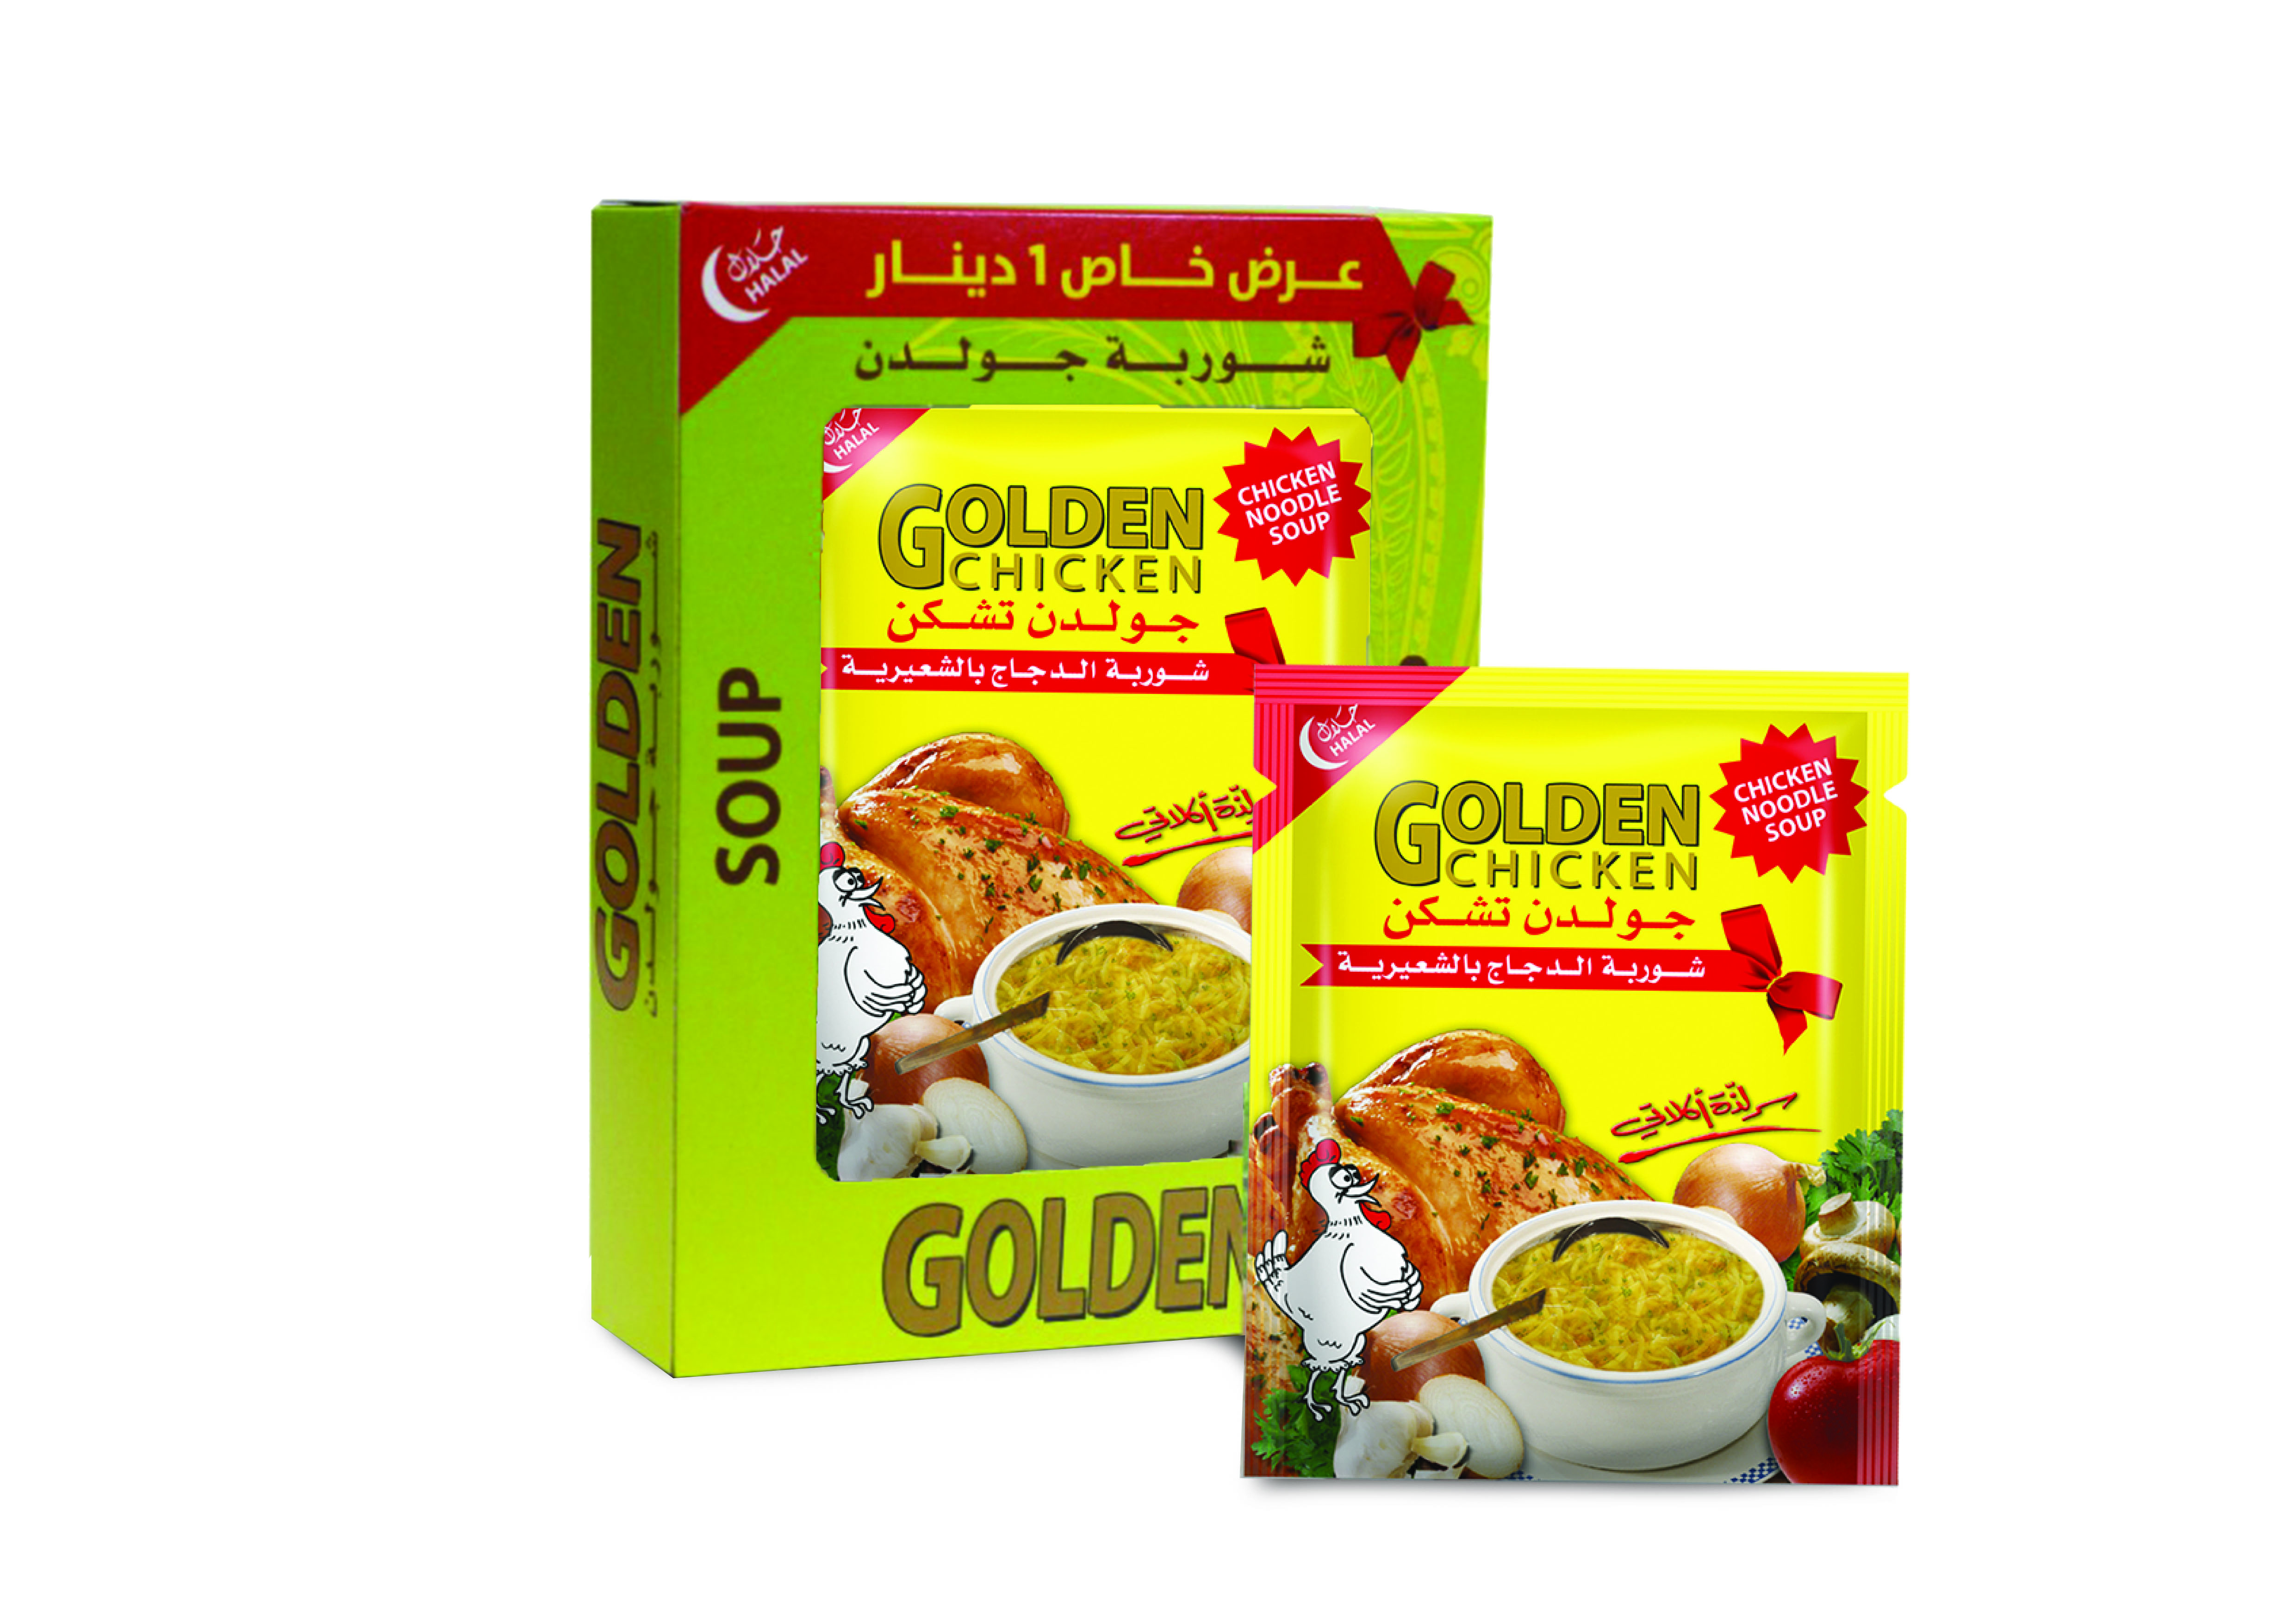 Chicken Noodle Soup Offer (3 Bags)